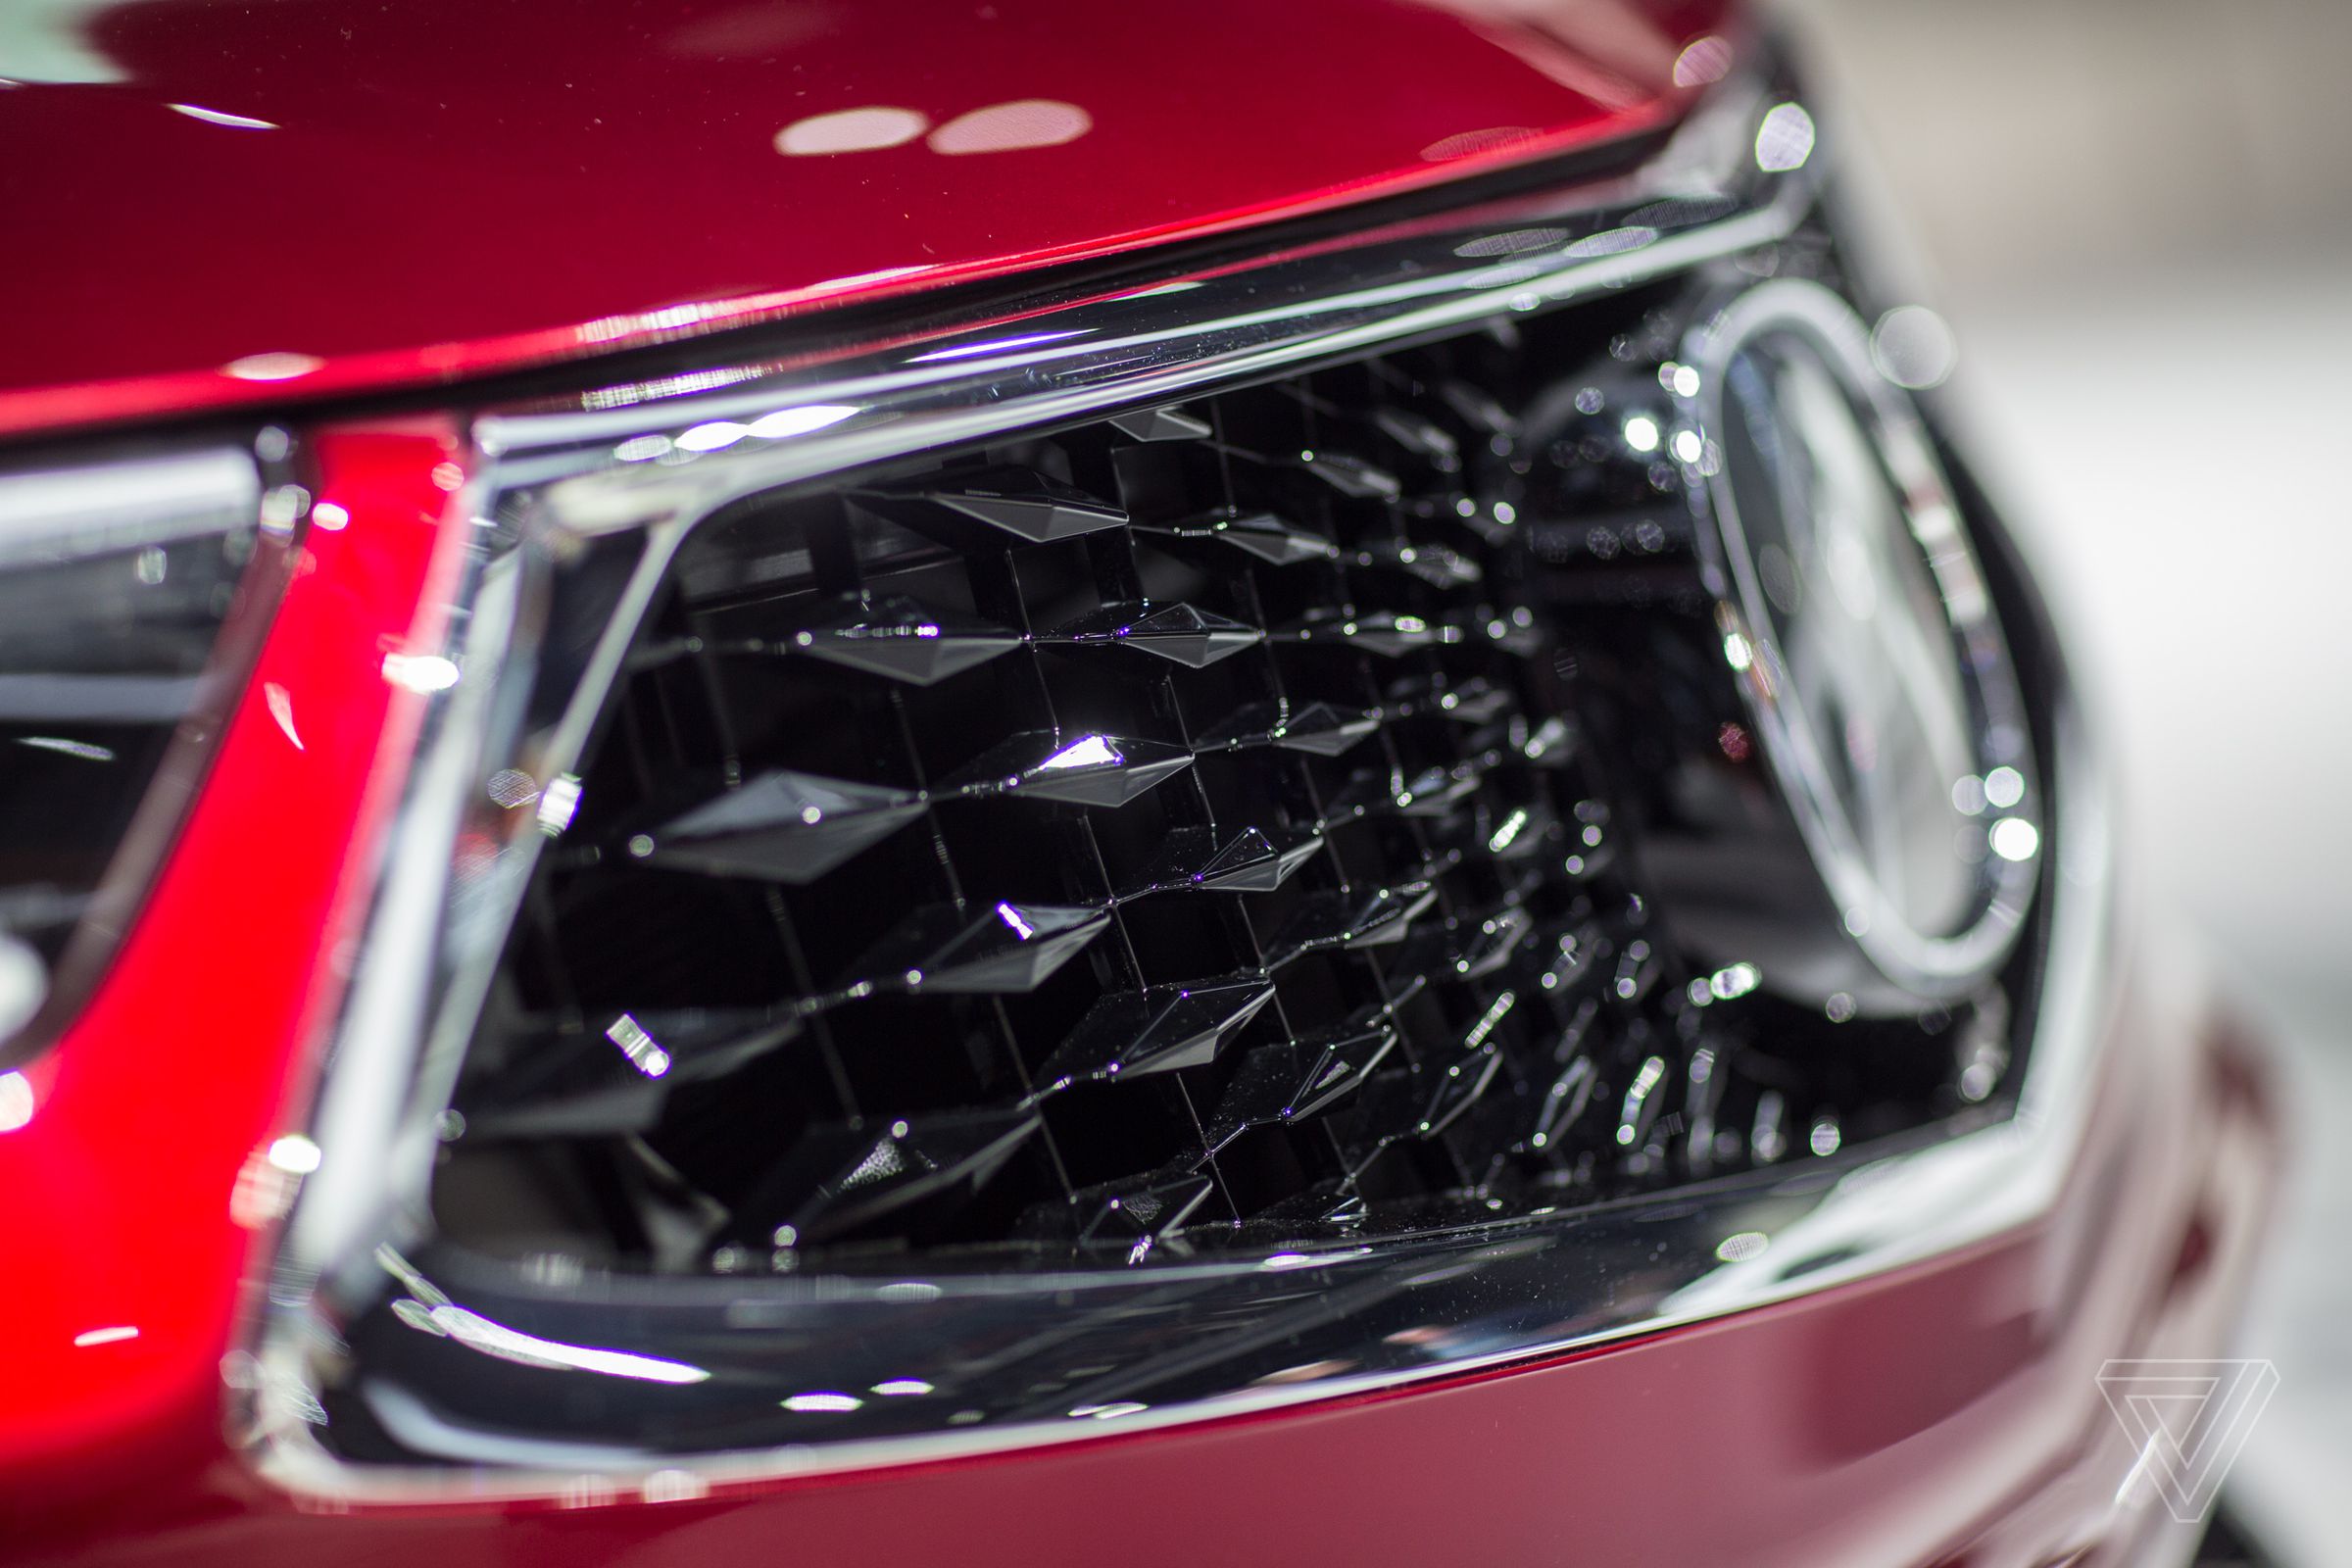 Grille details on the new Acura RDX prototype. See more photos here.